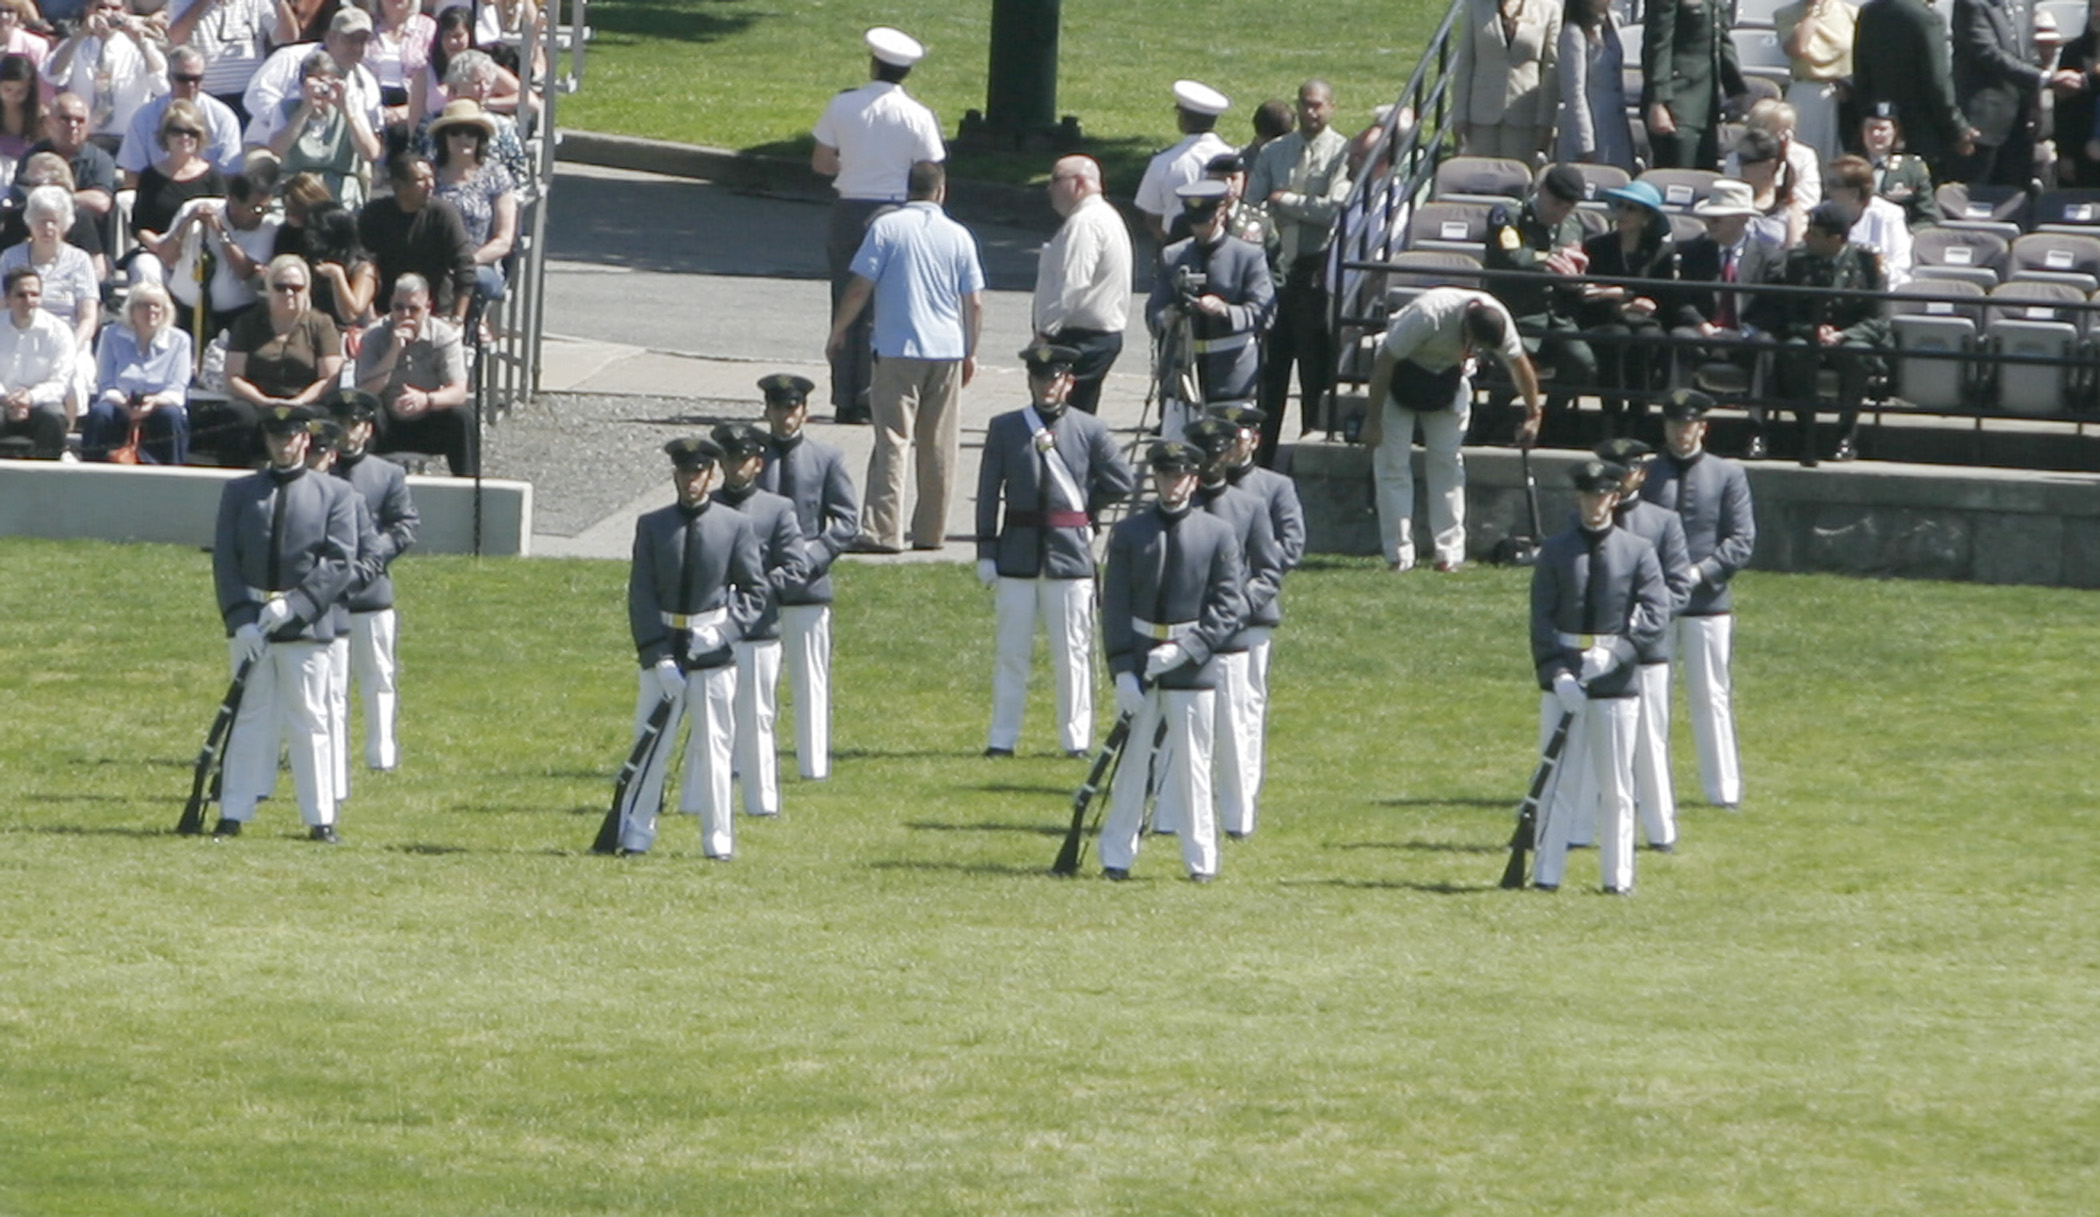 an image of men in uniforms at a baseball game